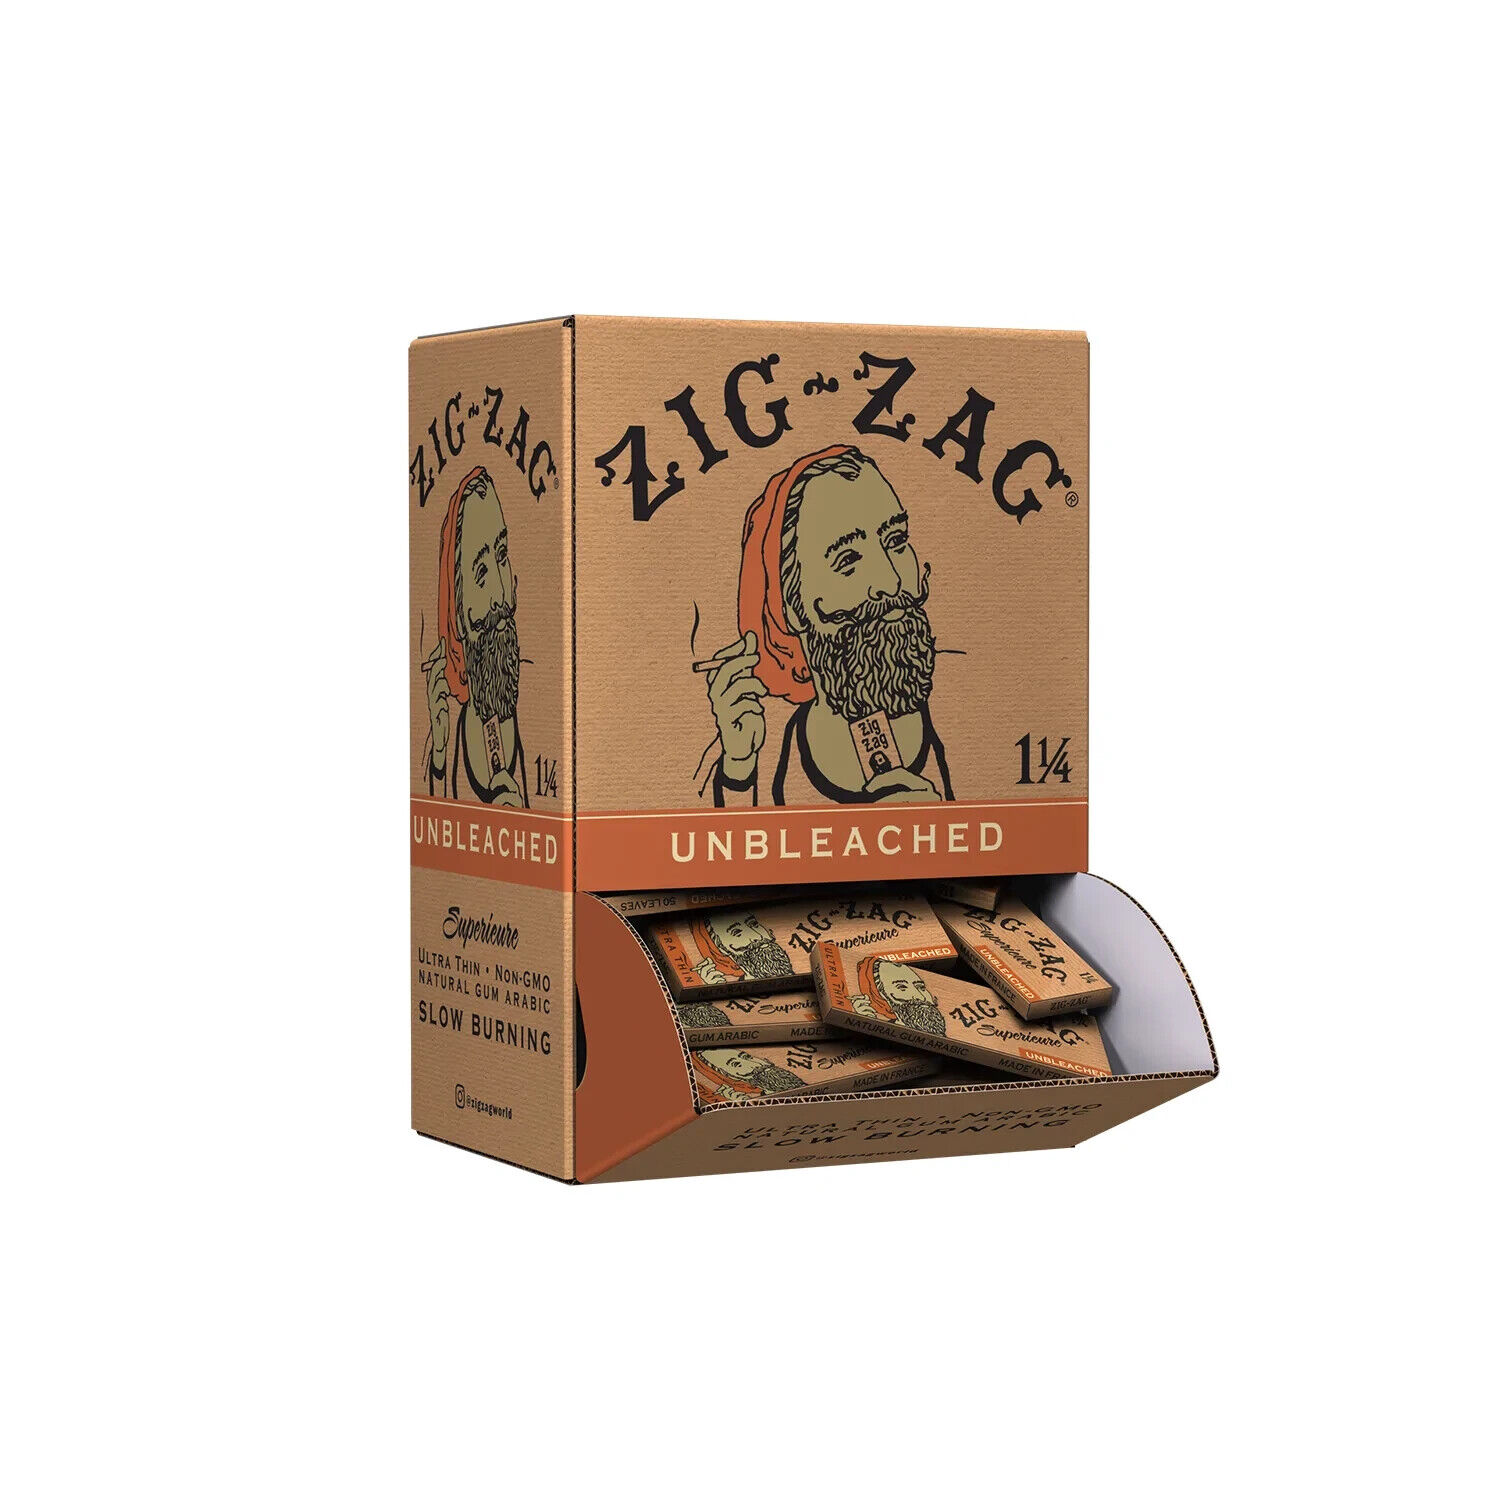 😎FULL BOX ZIG ZAG UNBLEACHED SUPERIEURE PAPERS✨1 ¼ SIZE✨48 BOOKLETS